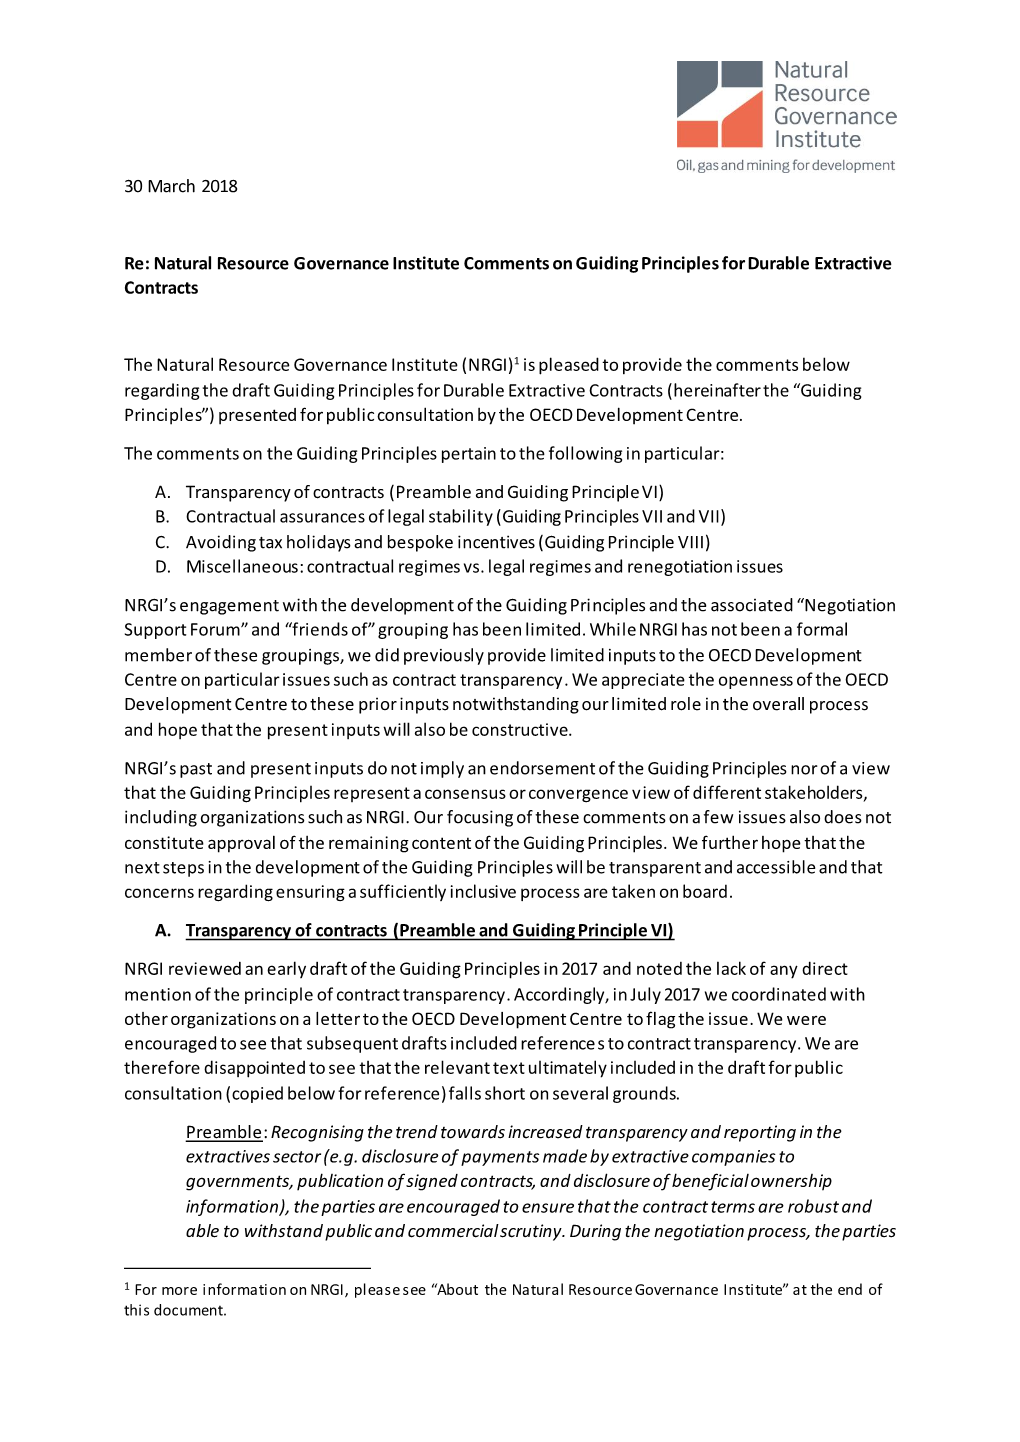 Natural Resource Governance Institute Comments on Guiding Principles for Durable Extractive Contracts